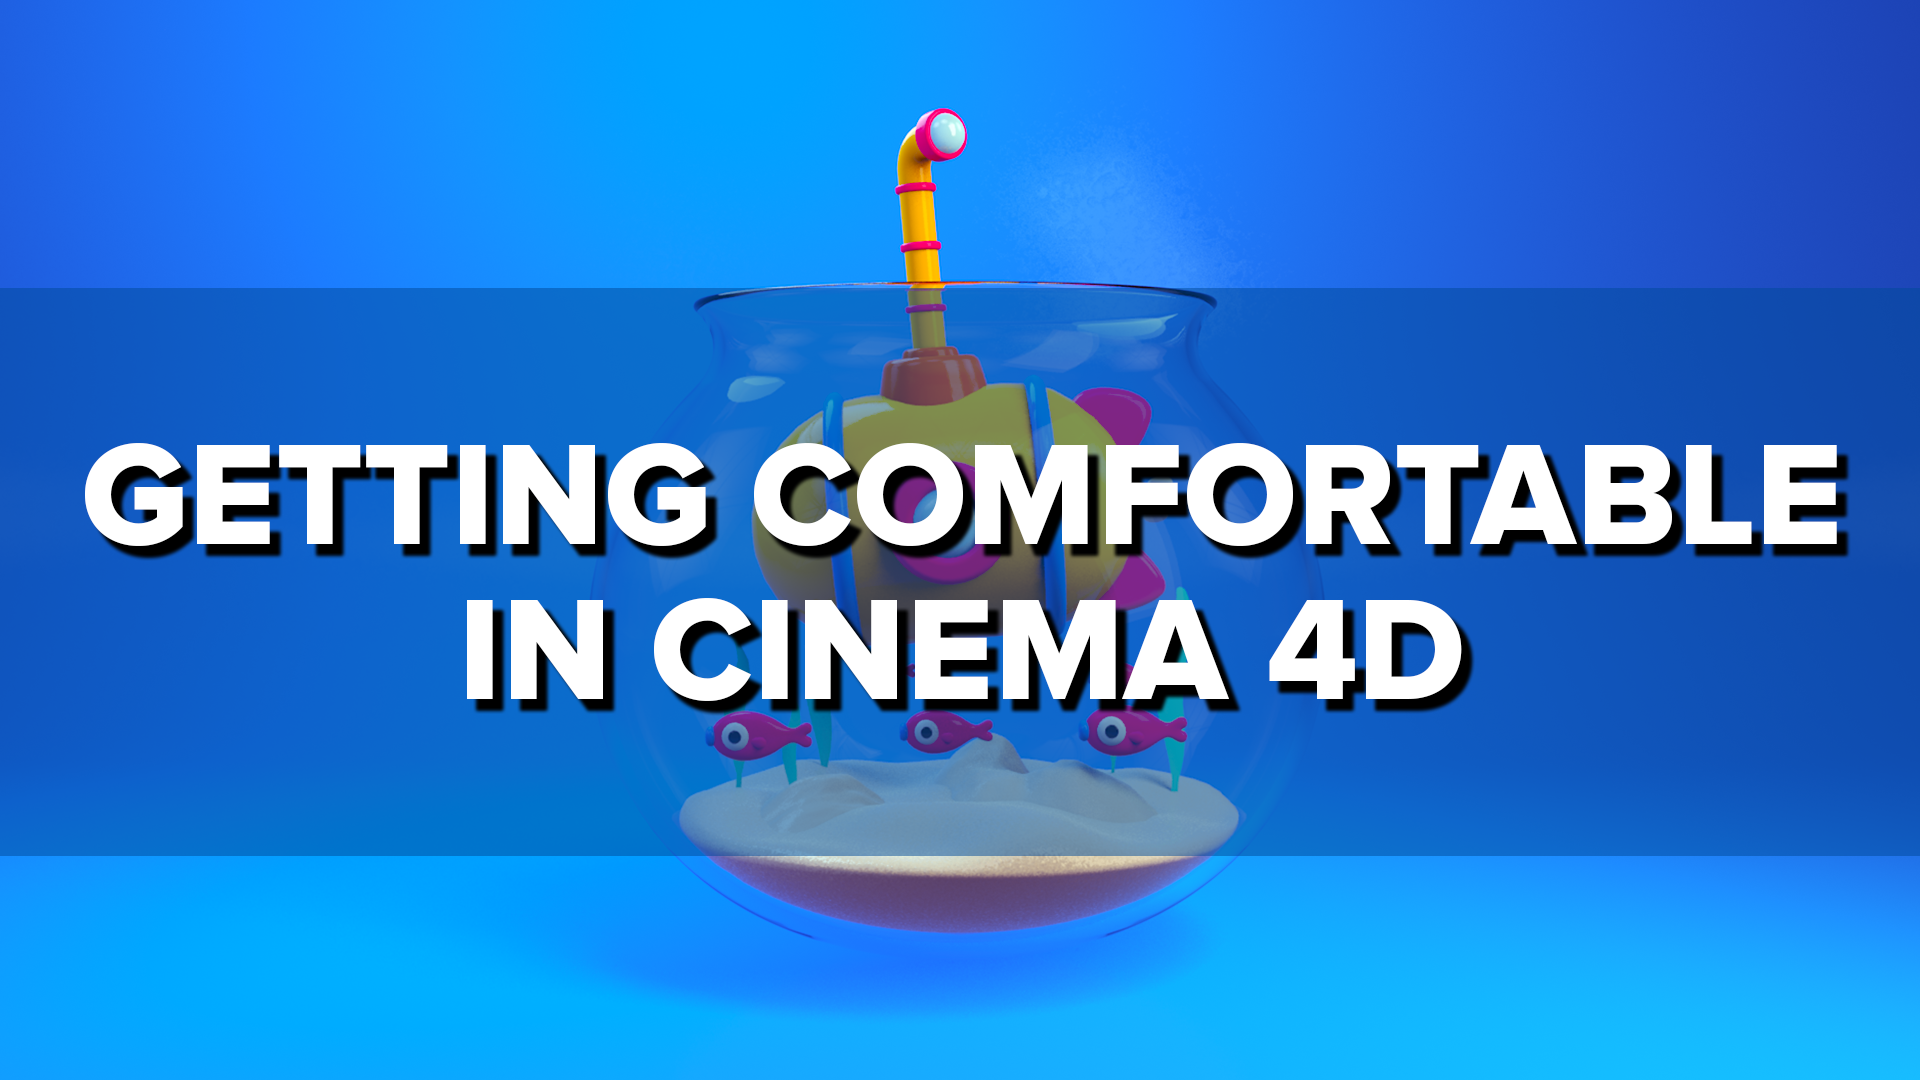 Getting Started with Cinema 4D, Part 02: Getting Comfortable in Cinema 4D